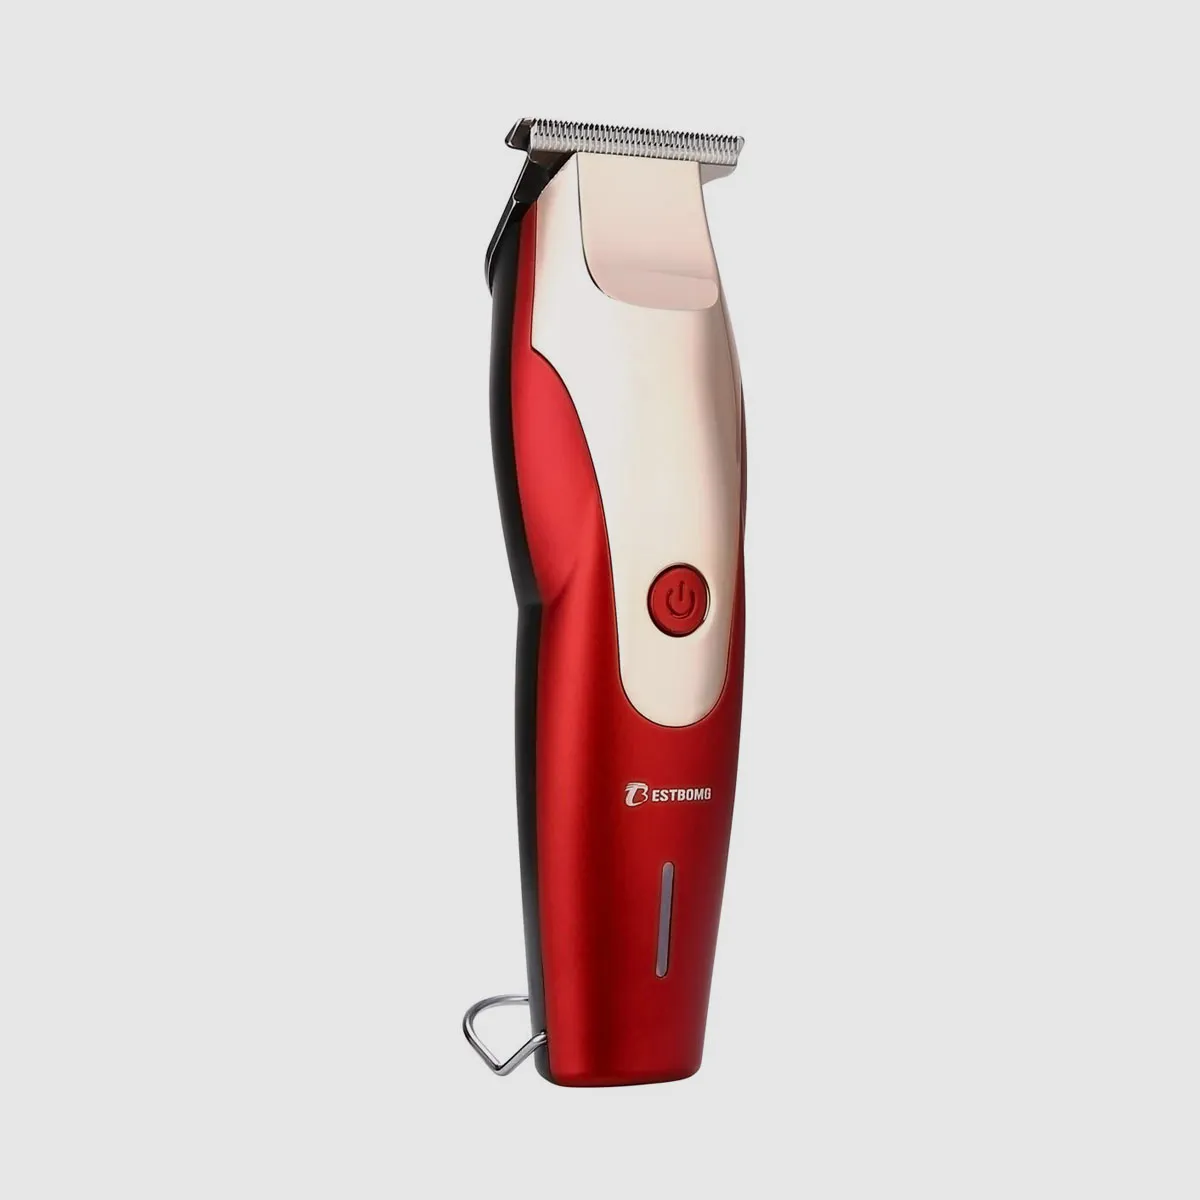 Pro T Outliner Mens Hair Clippers